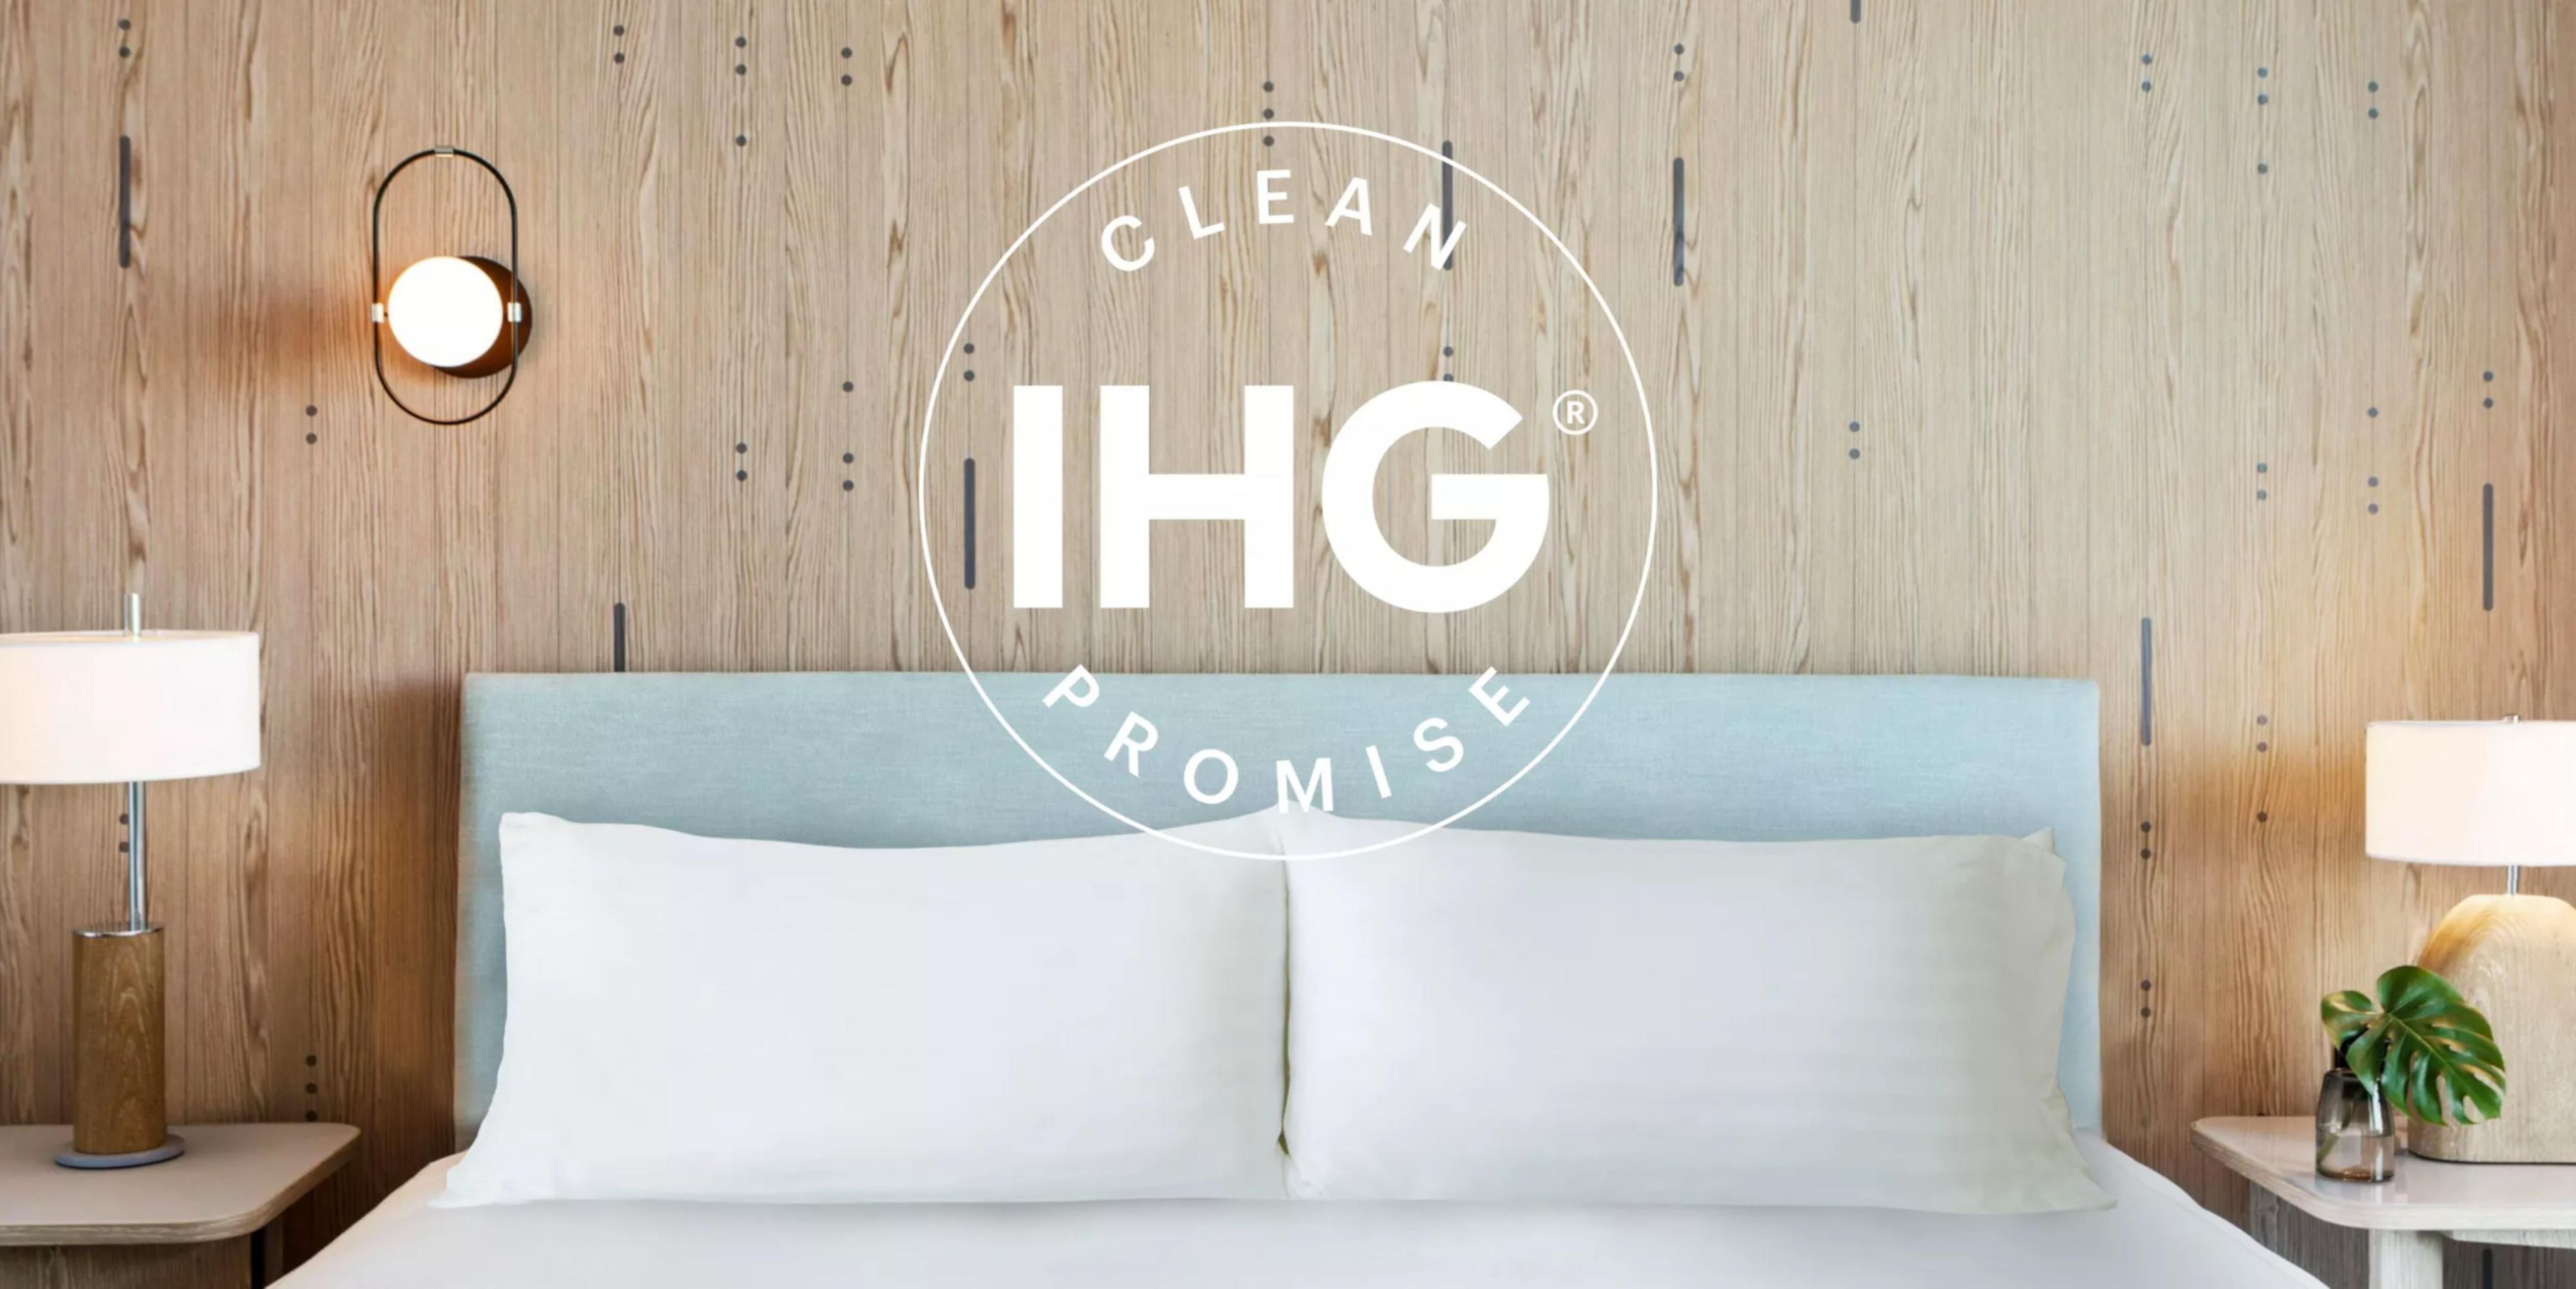 Good isn’t good enough – we’re committed to high levels of cleanliness. That means clean, well-maintained, clutter-free rooms that meet our standards. If this isn’t what you find when you check-in, then we promise to make it right.